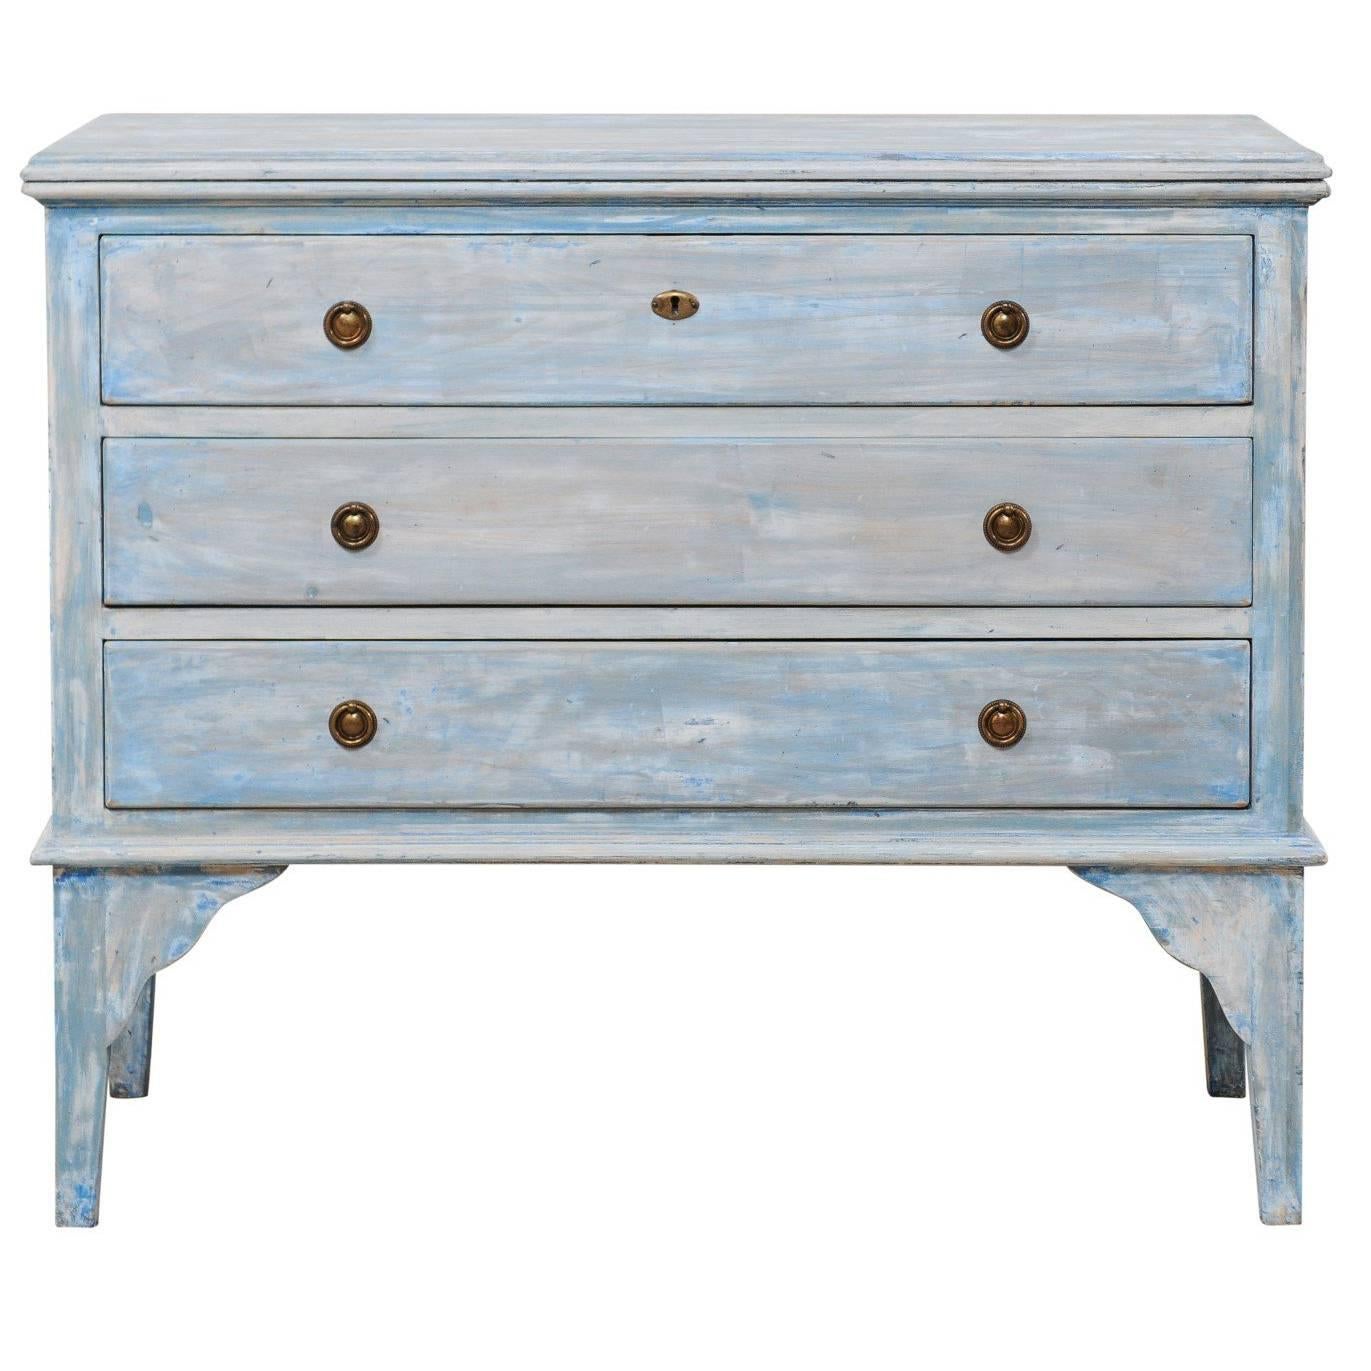 Vintage Blue Toned Painted Wood Three-Drawer Chest Raised on Tall Scalloped Legs